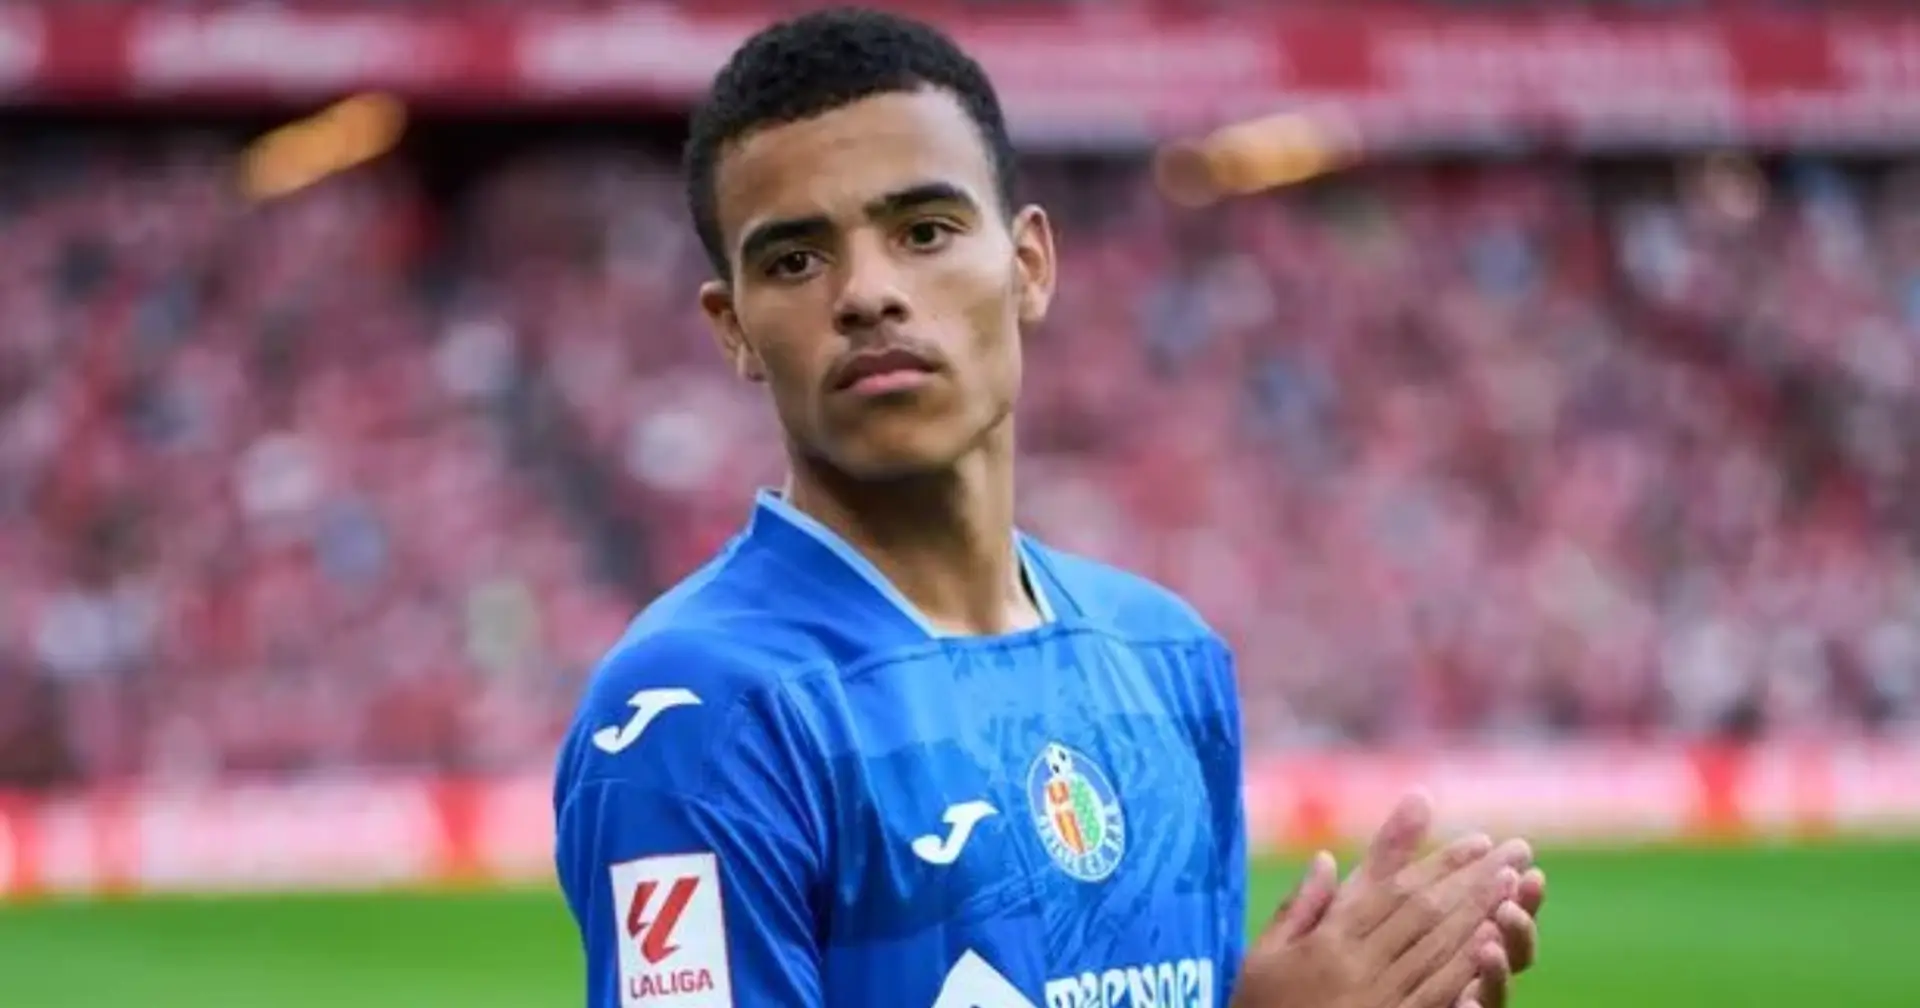 Getafe interested in permanent Mason Greenwood transfer — Man United's stance revealed (reliability: 4 stars)